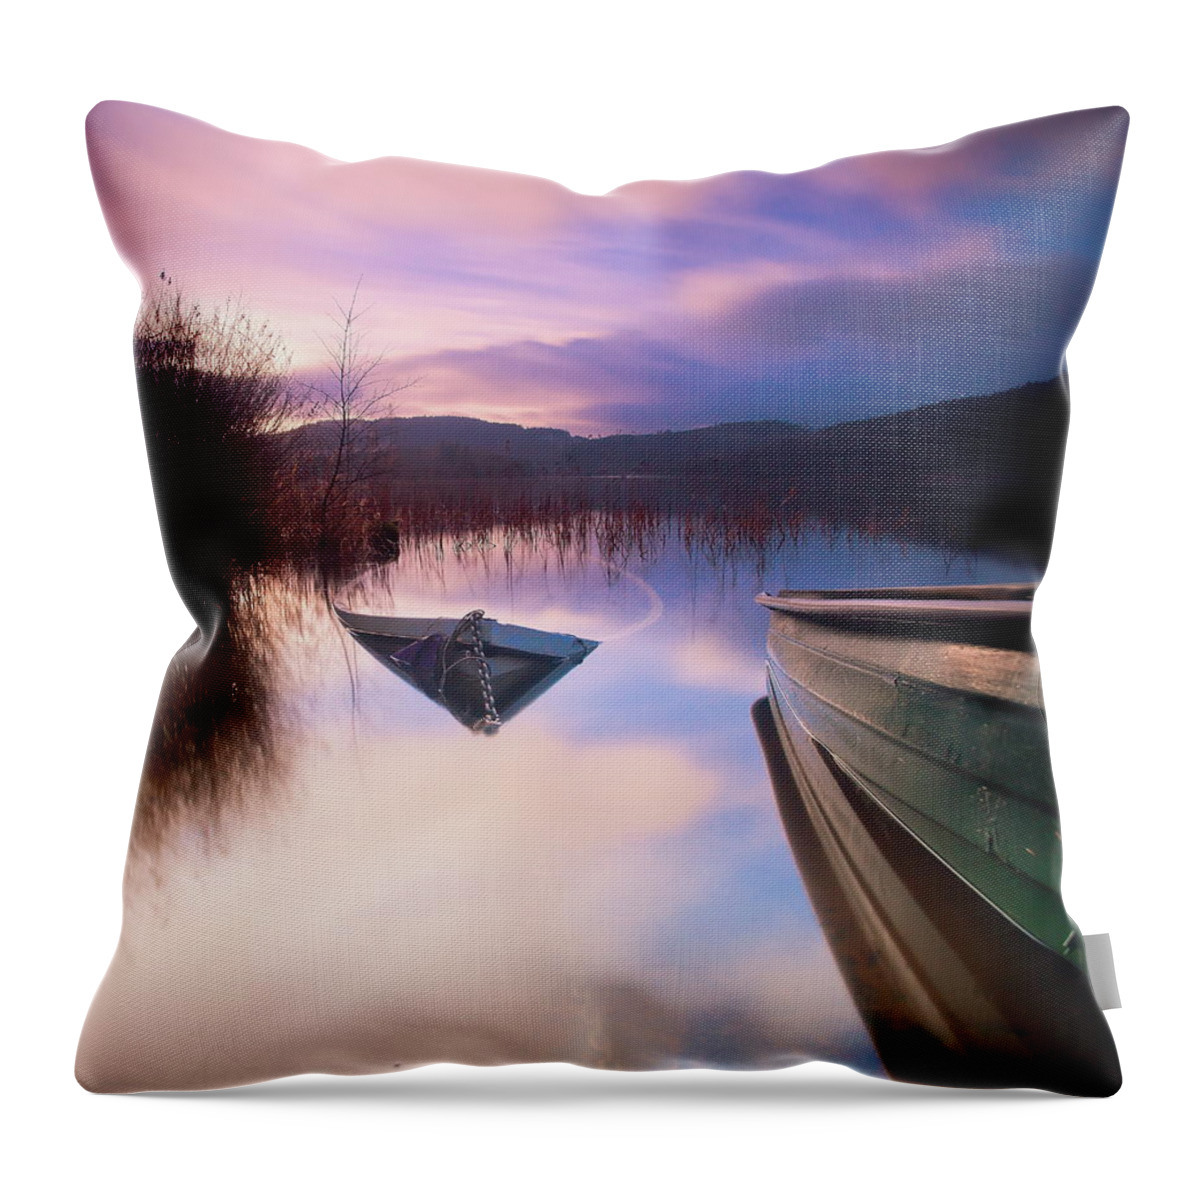 Tranquility Throw Pillow featuring the photograph Disappearing Under The Water by Unique Landscape